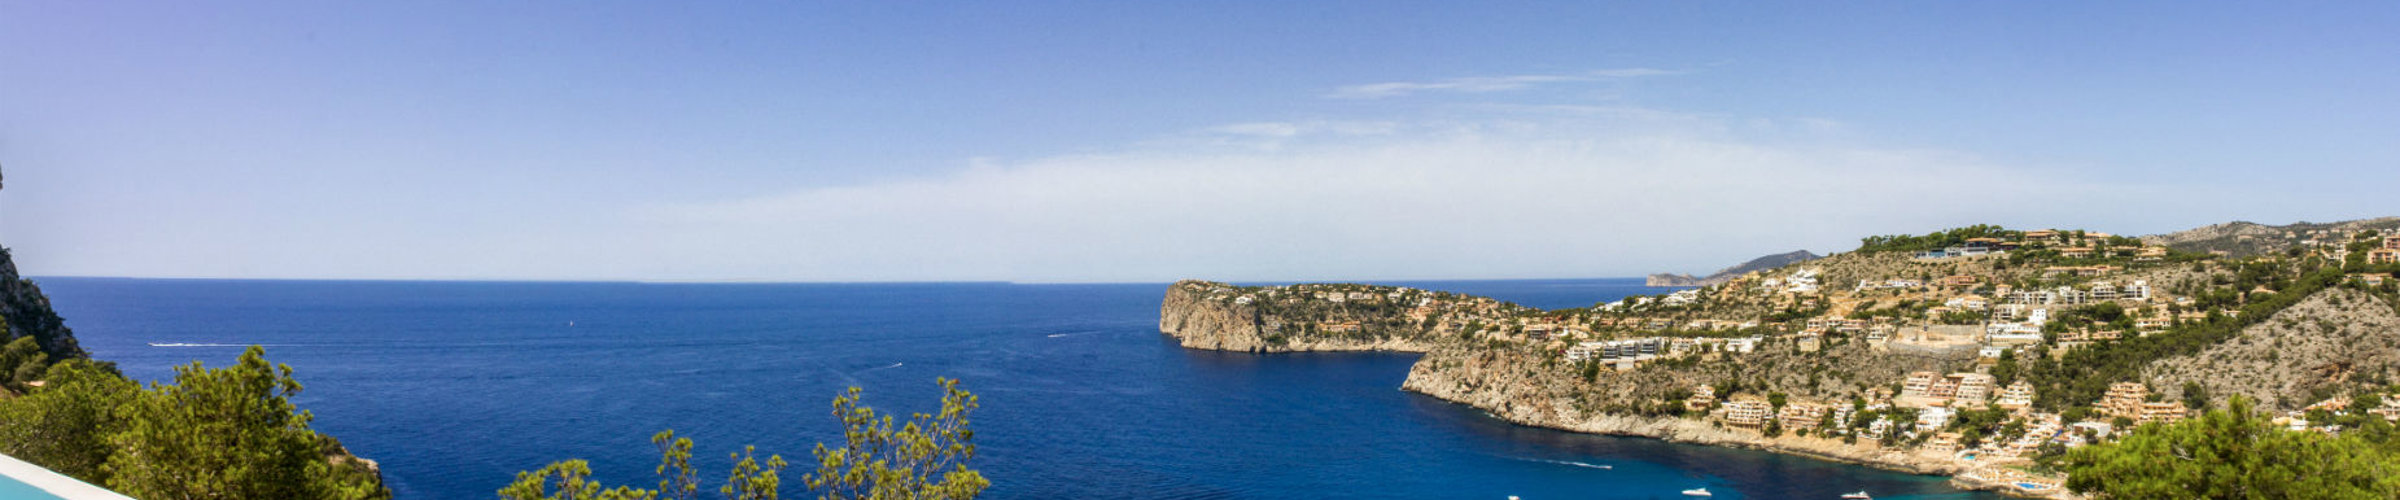 Best Time To Visit Mallorca